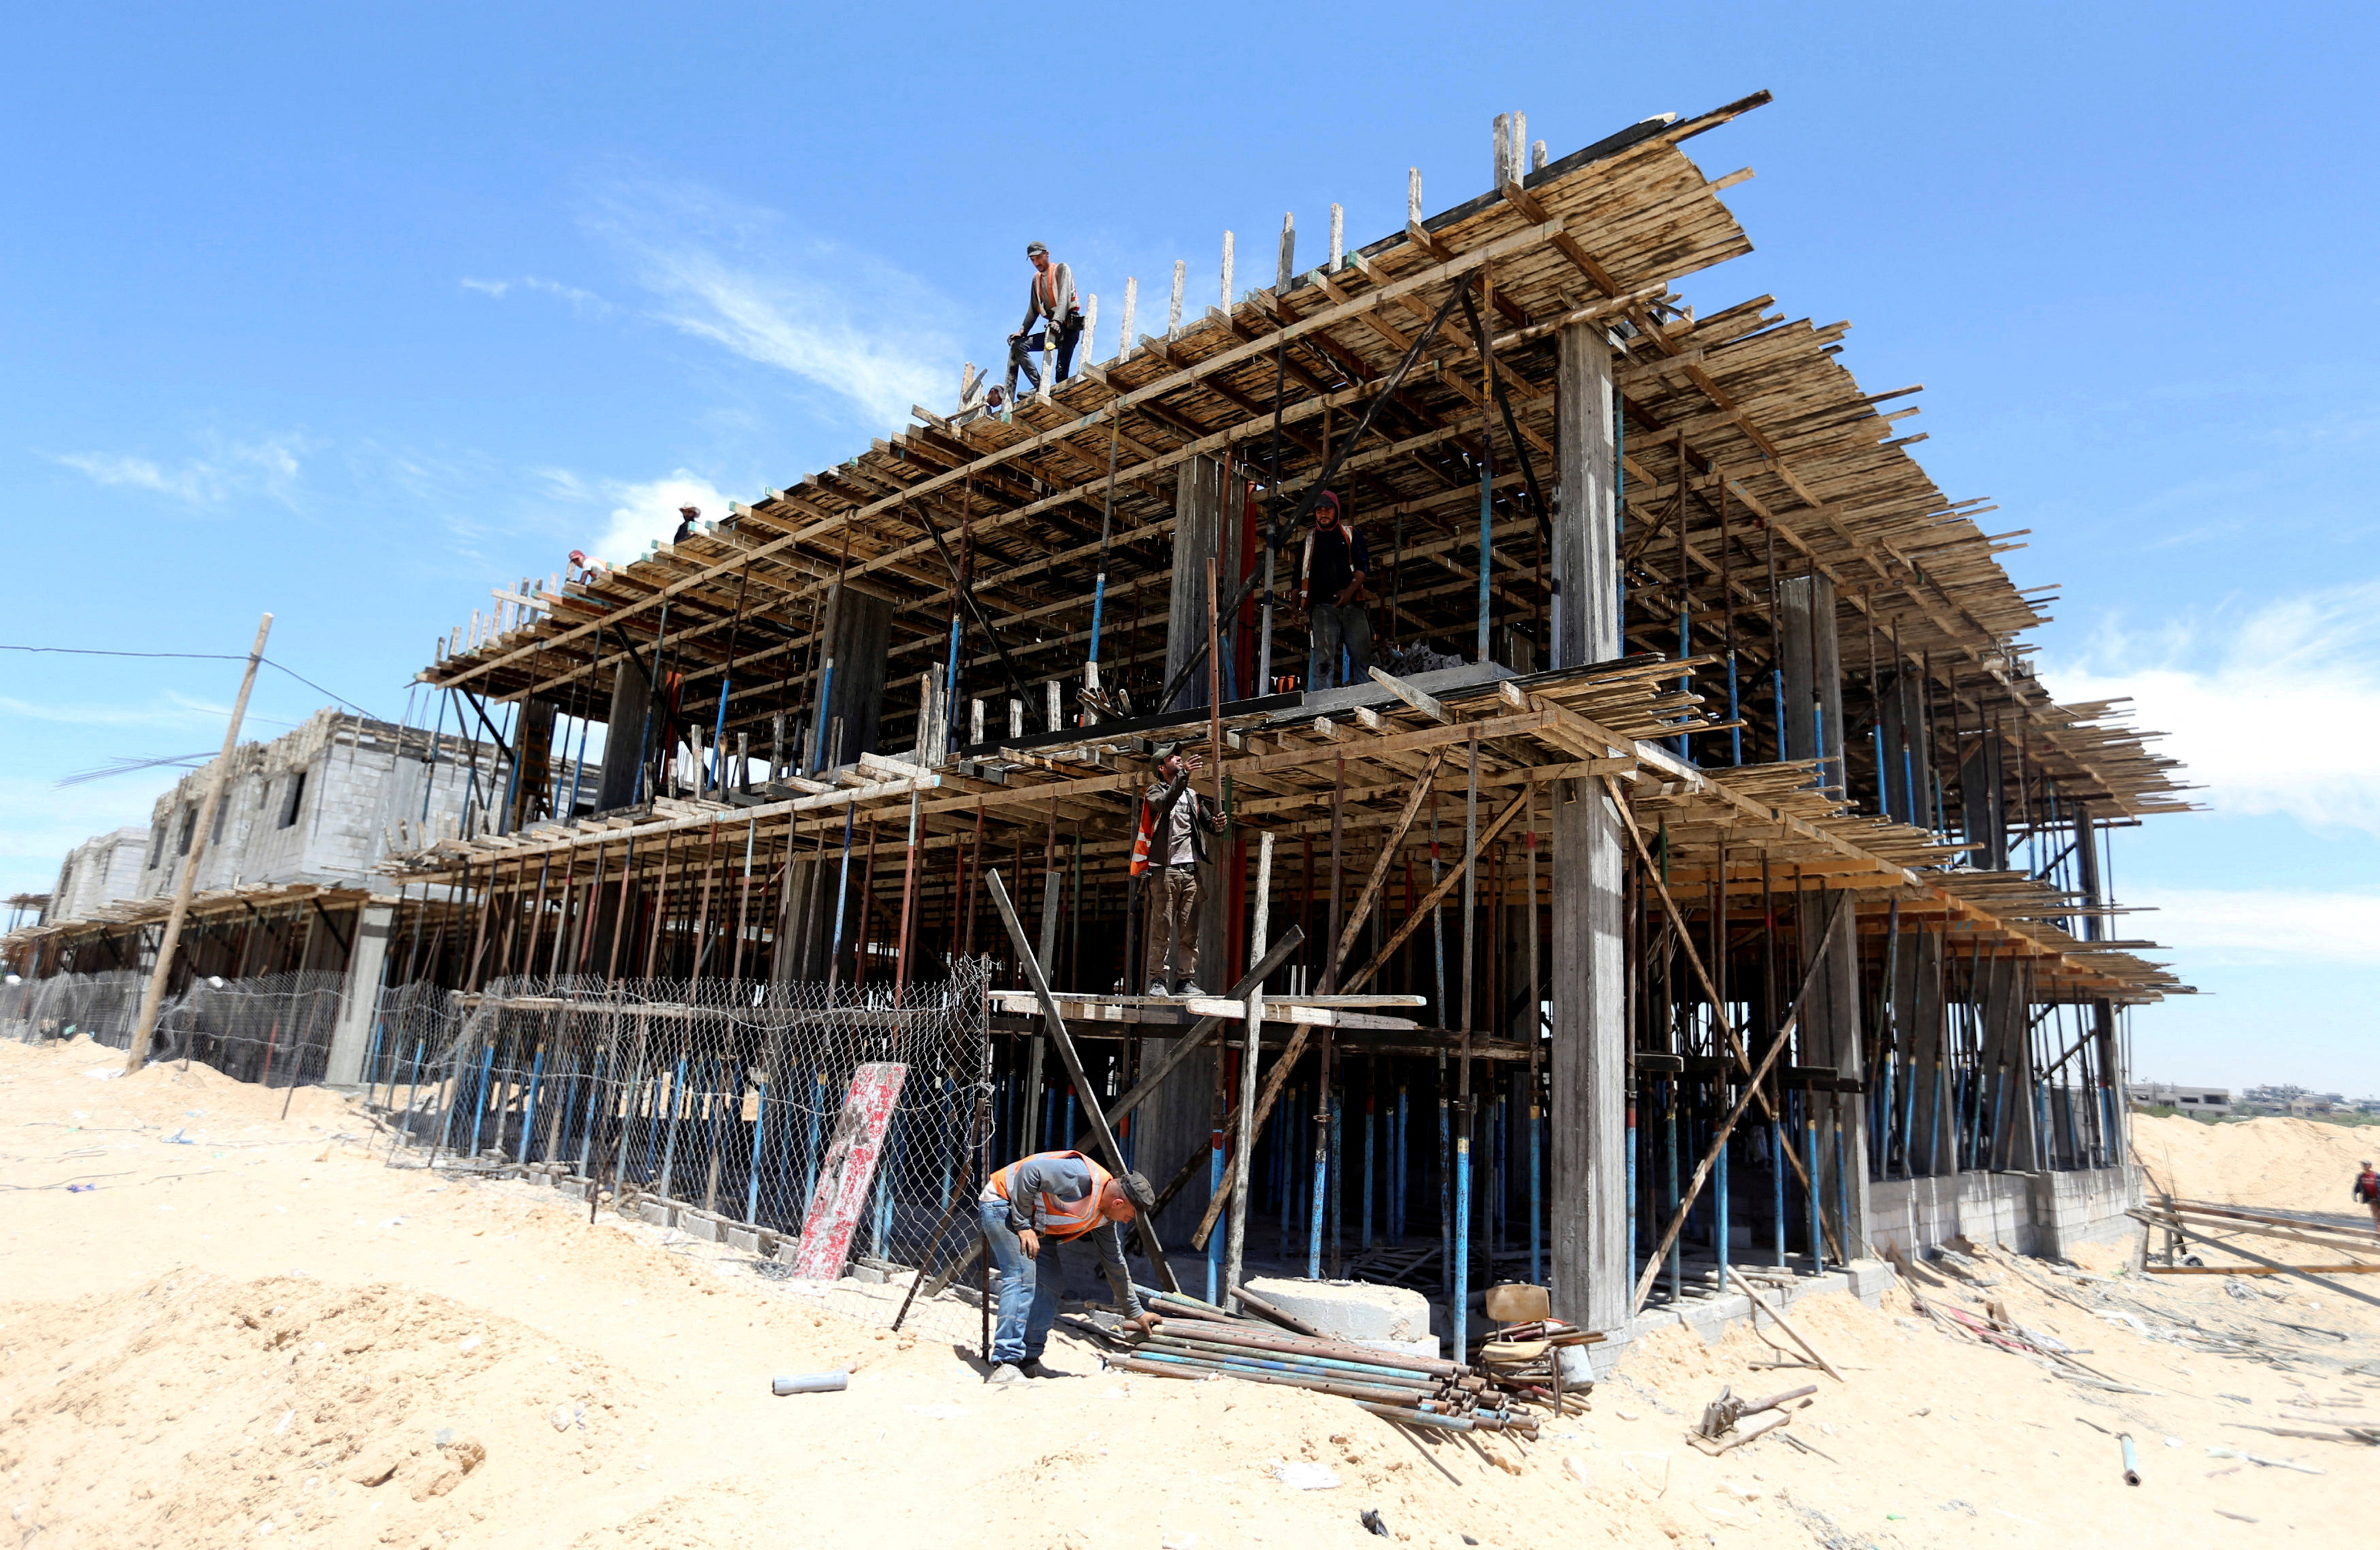 Palestinian workers work in a Qatari-funded construction project in the southern Gaza Strip